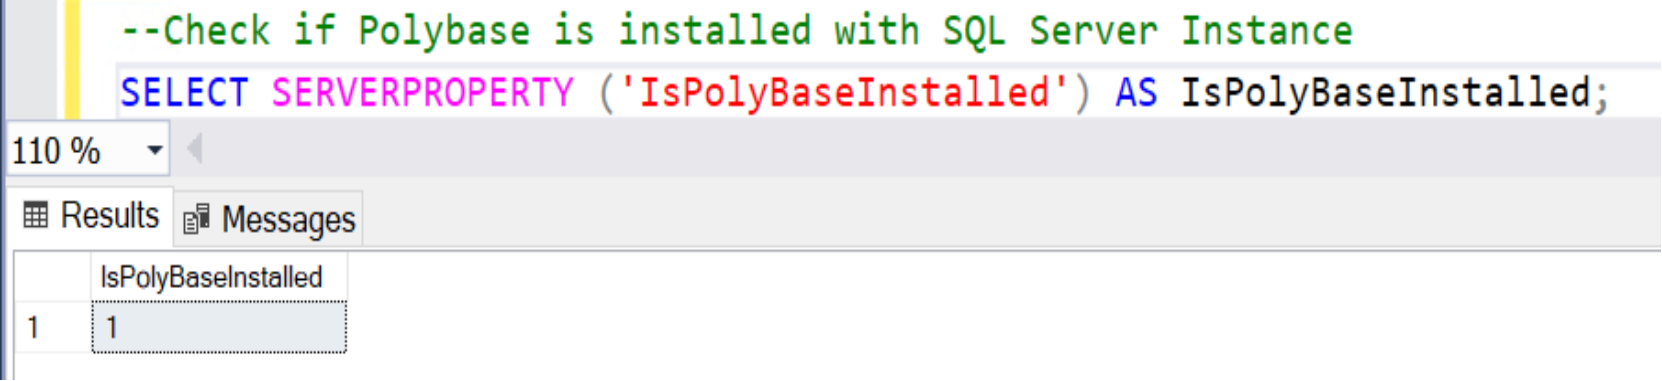 This shows an example of how to check the polybase installation status. 